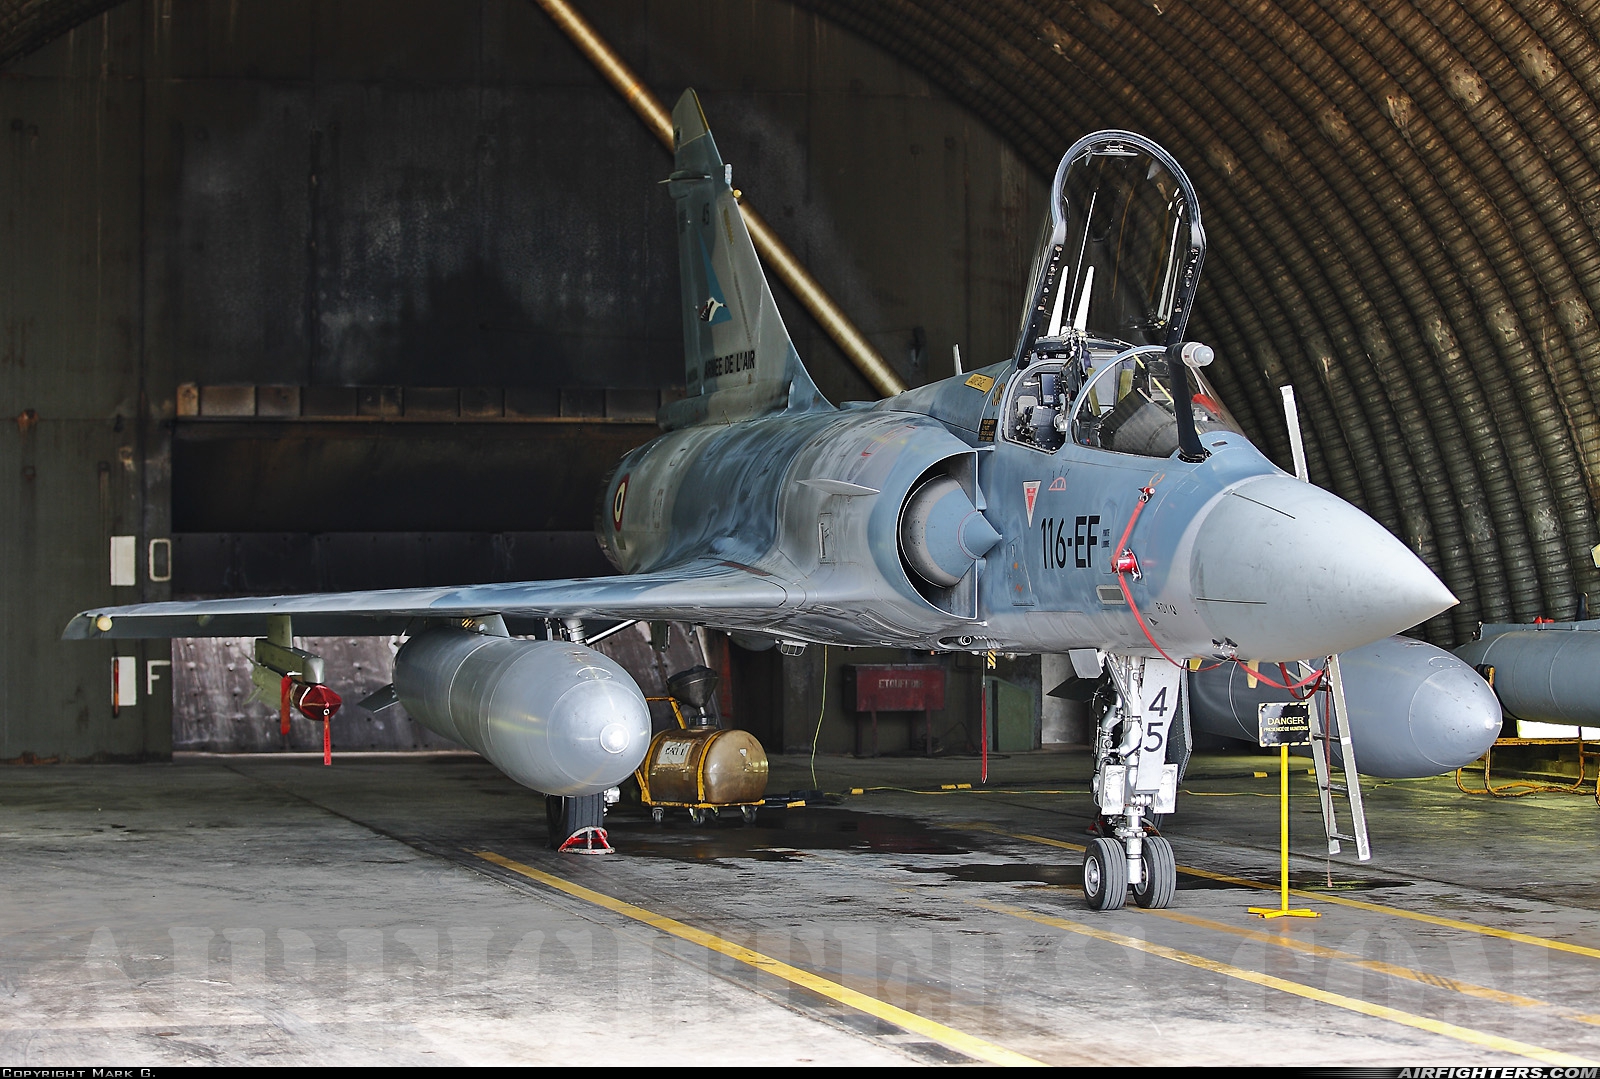 France - Air Force Dassault Mirage 2000-5F 45 at Luxeuil - St. Sauveur (LFSX), France